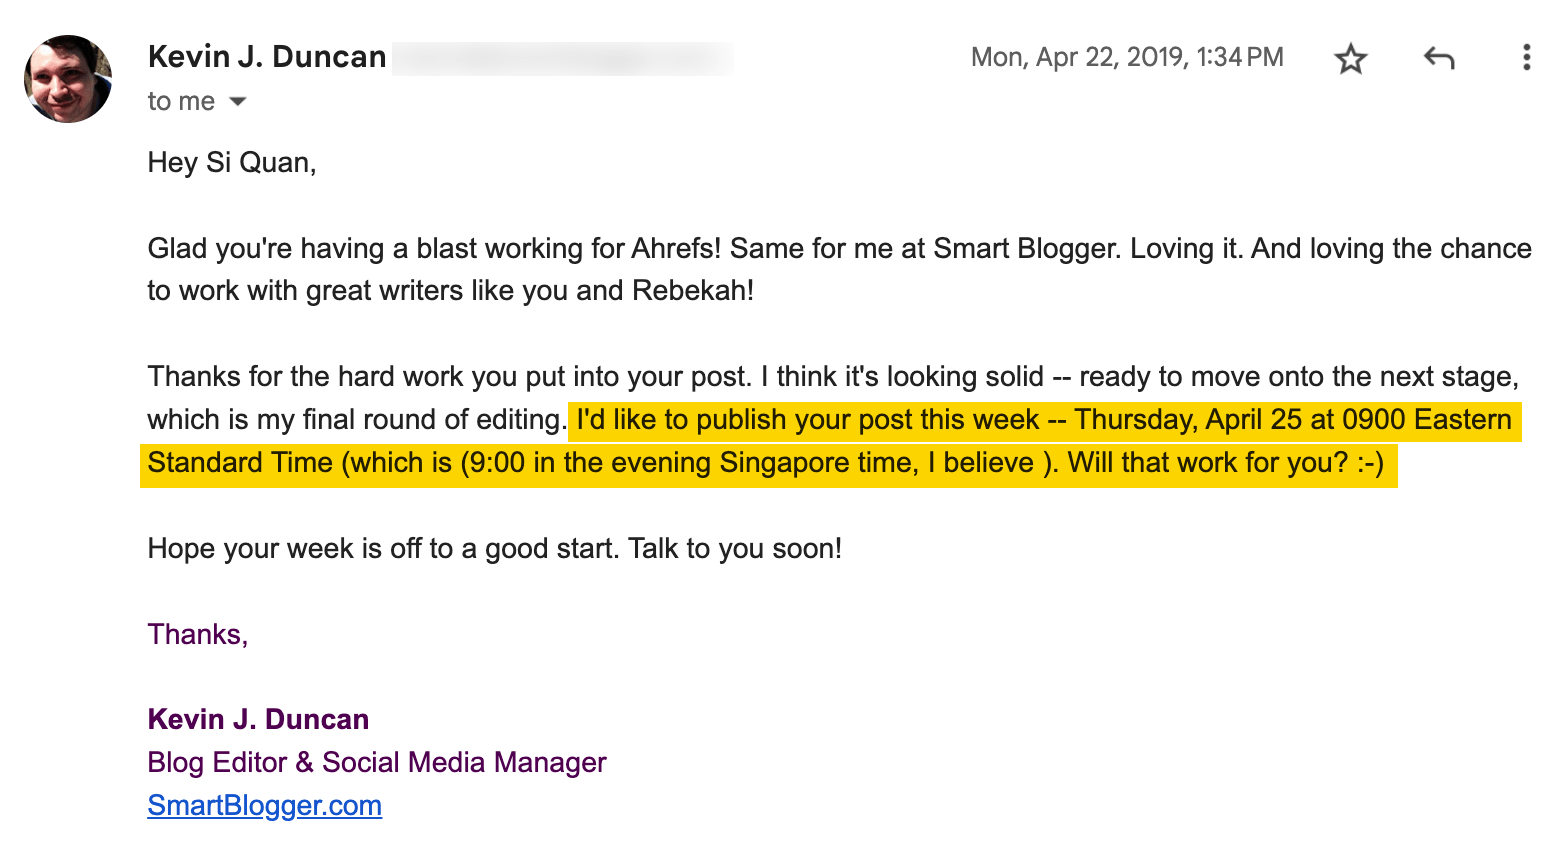 SmartBlogger's editor letting SQ know when the guest post will be published
